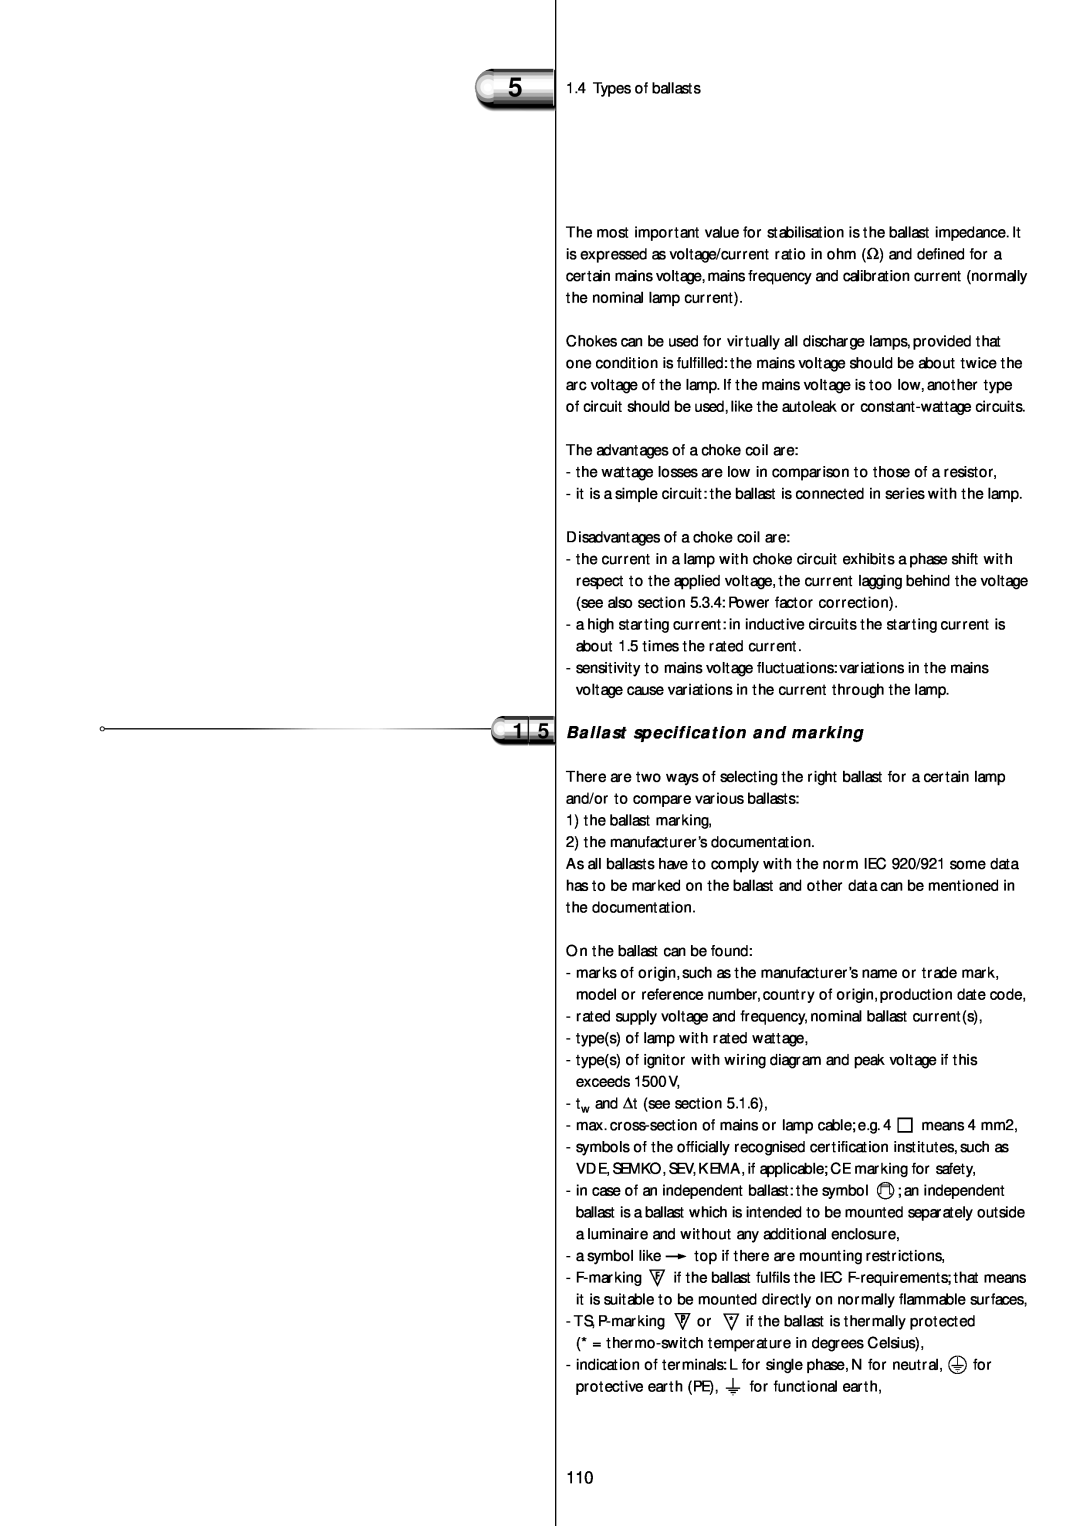 Philips Electromagnetic Lamp manual Ballast specification and marking 